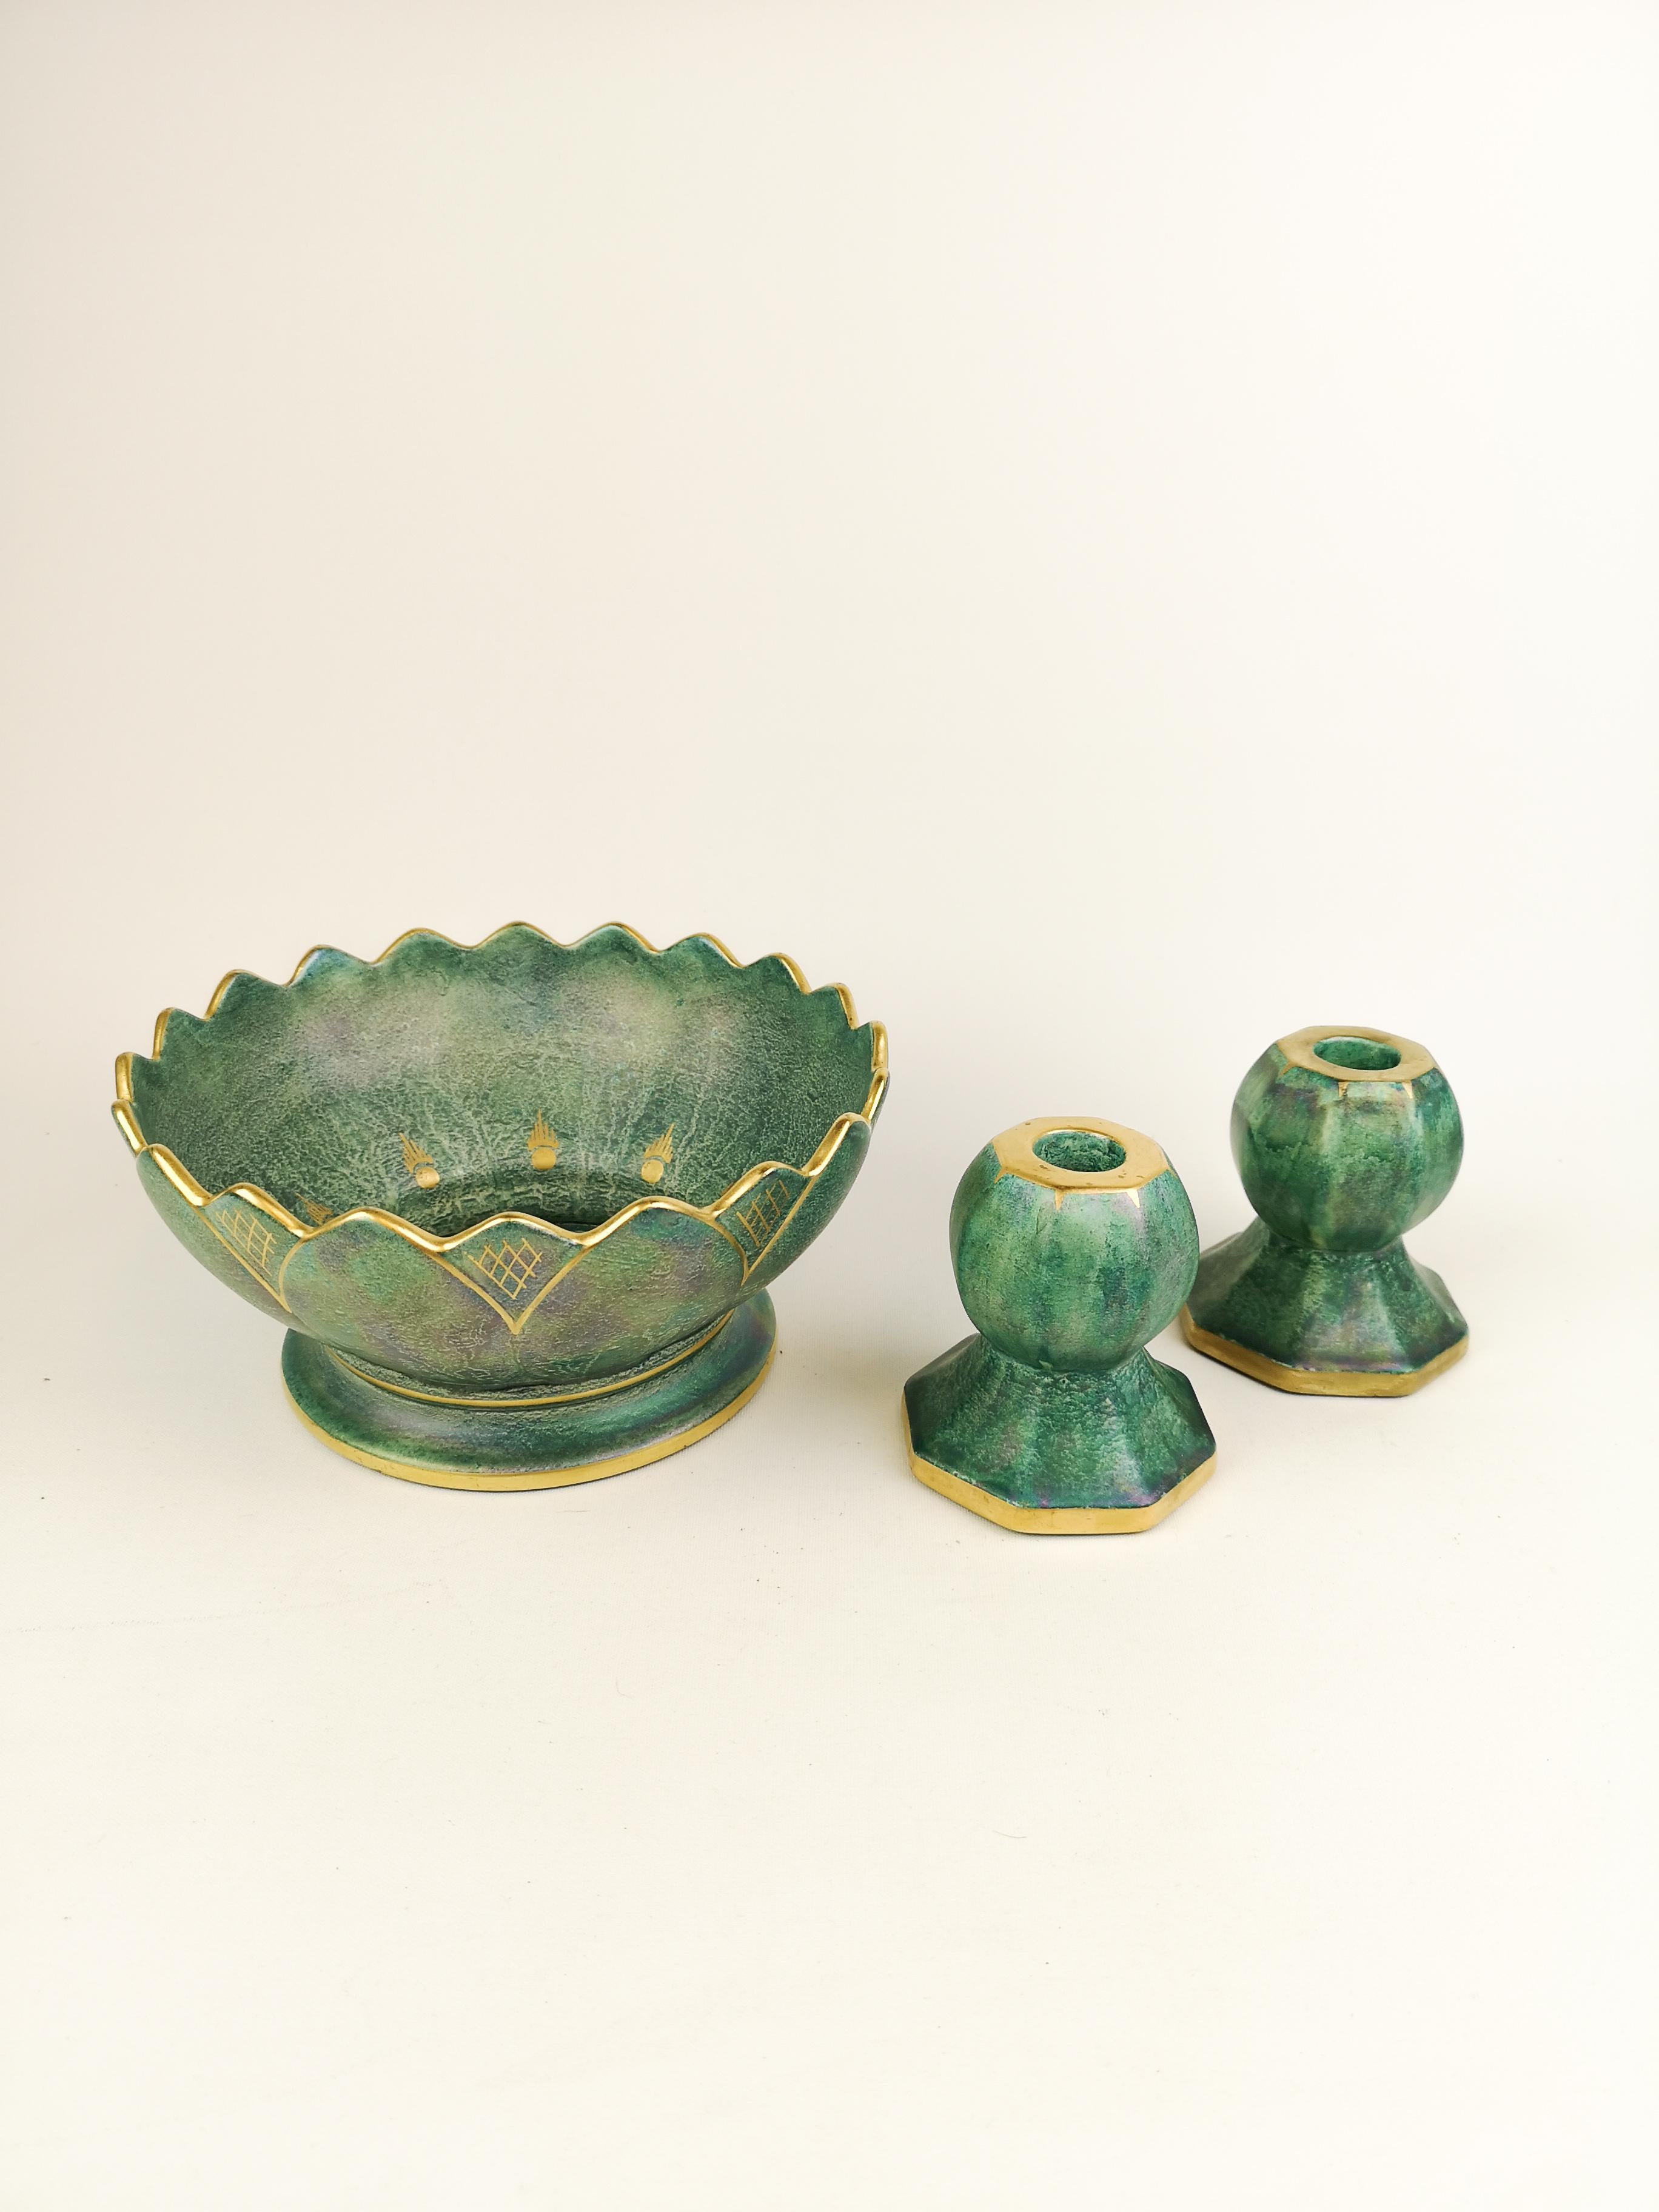 A wonderful bowl and candlesticks created by Josef Ekberg and manufactured by Gustavsberg Sweden in 1920s. Wonderful green glaze with hand painted gold pattern on the bowl and Candlesticks. 

Measures: Bowl 21 cm D/ 11 cm H Candlesticks 10 cm H /